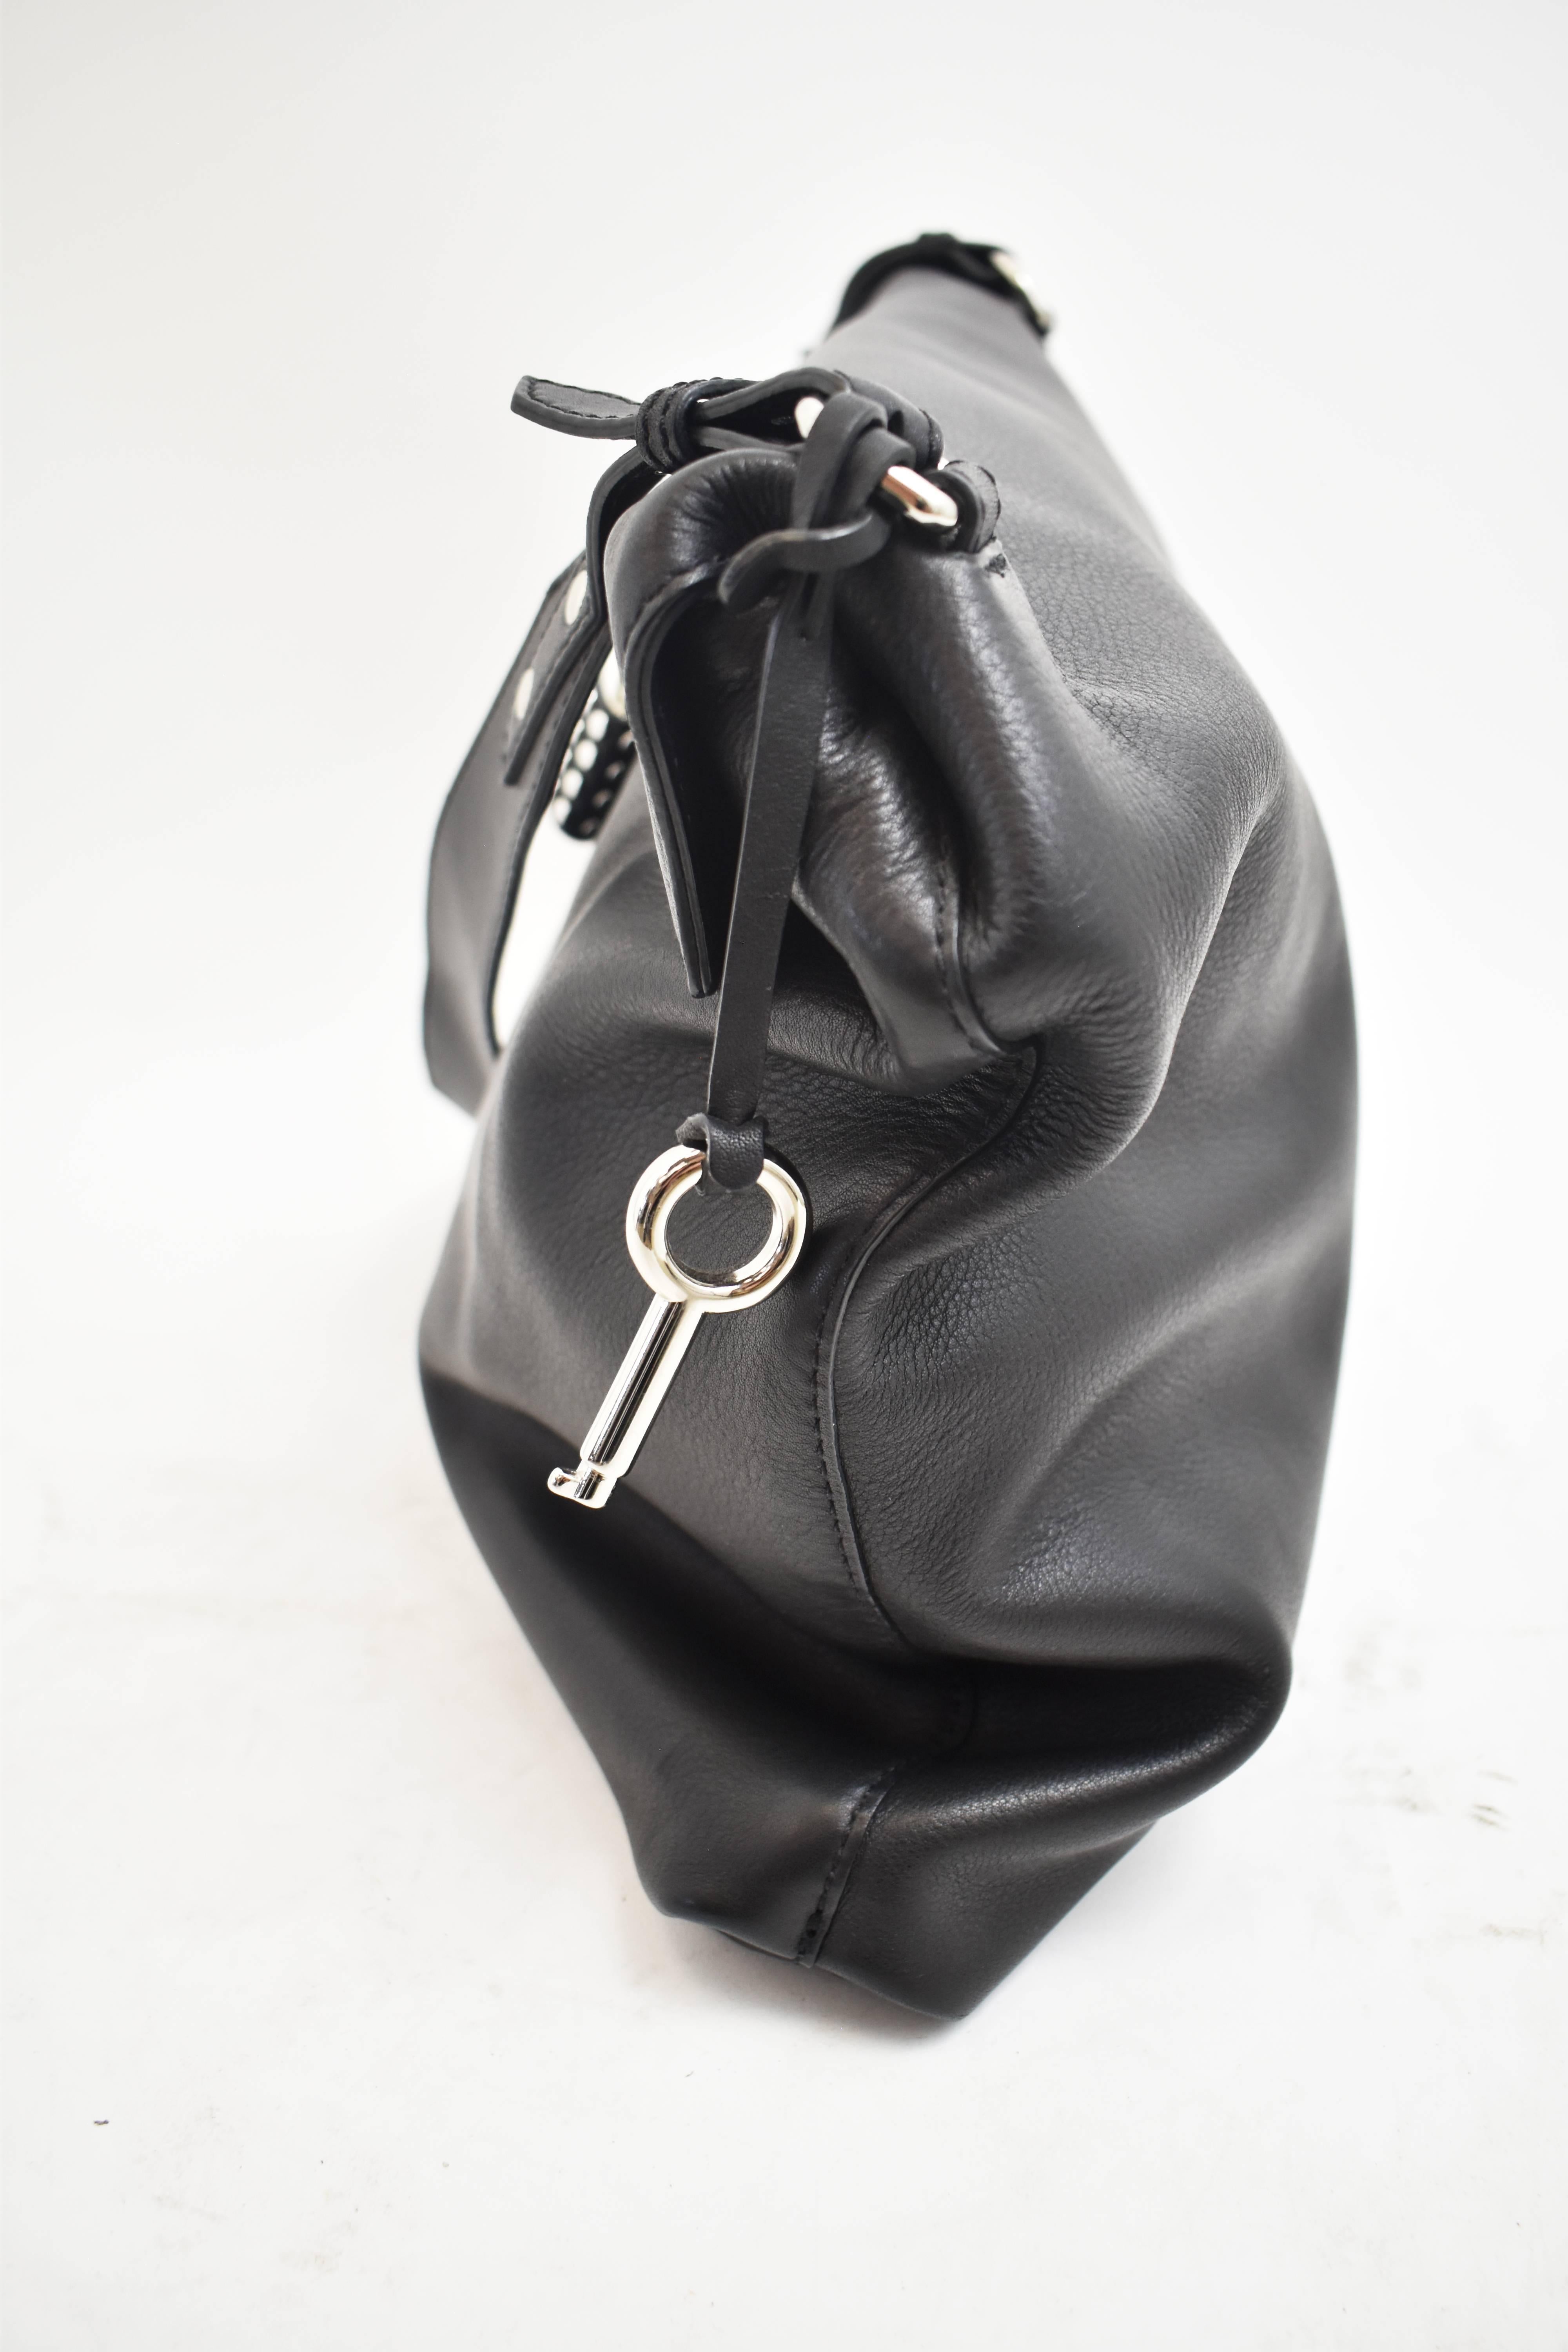 A Burberry black leather handbag with a single shoulder strap. It has a simple square shape with a fold-over fastening and magnetic clasp. The inside has a spacious interior and a zip pocket for valuables. The bag has silver hardware and a